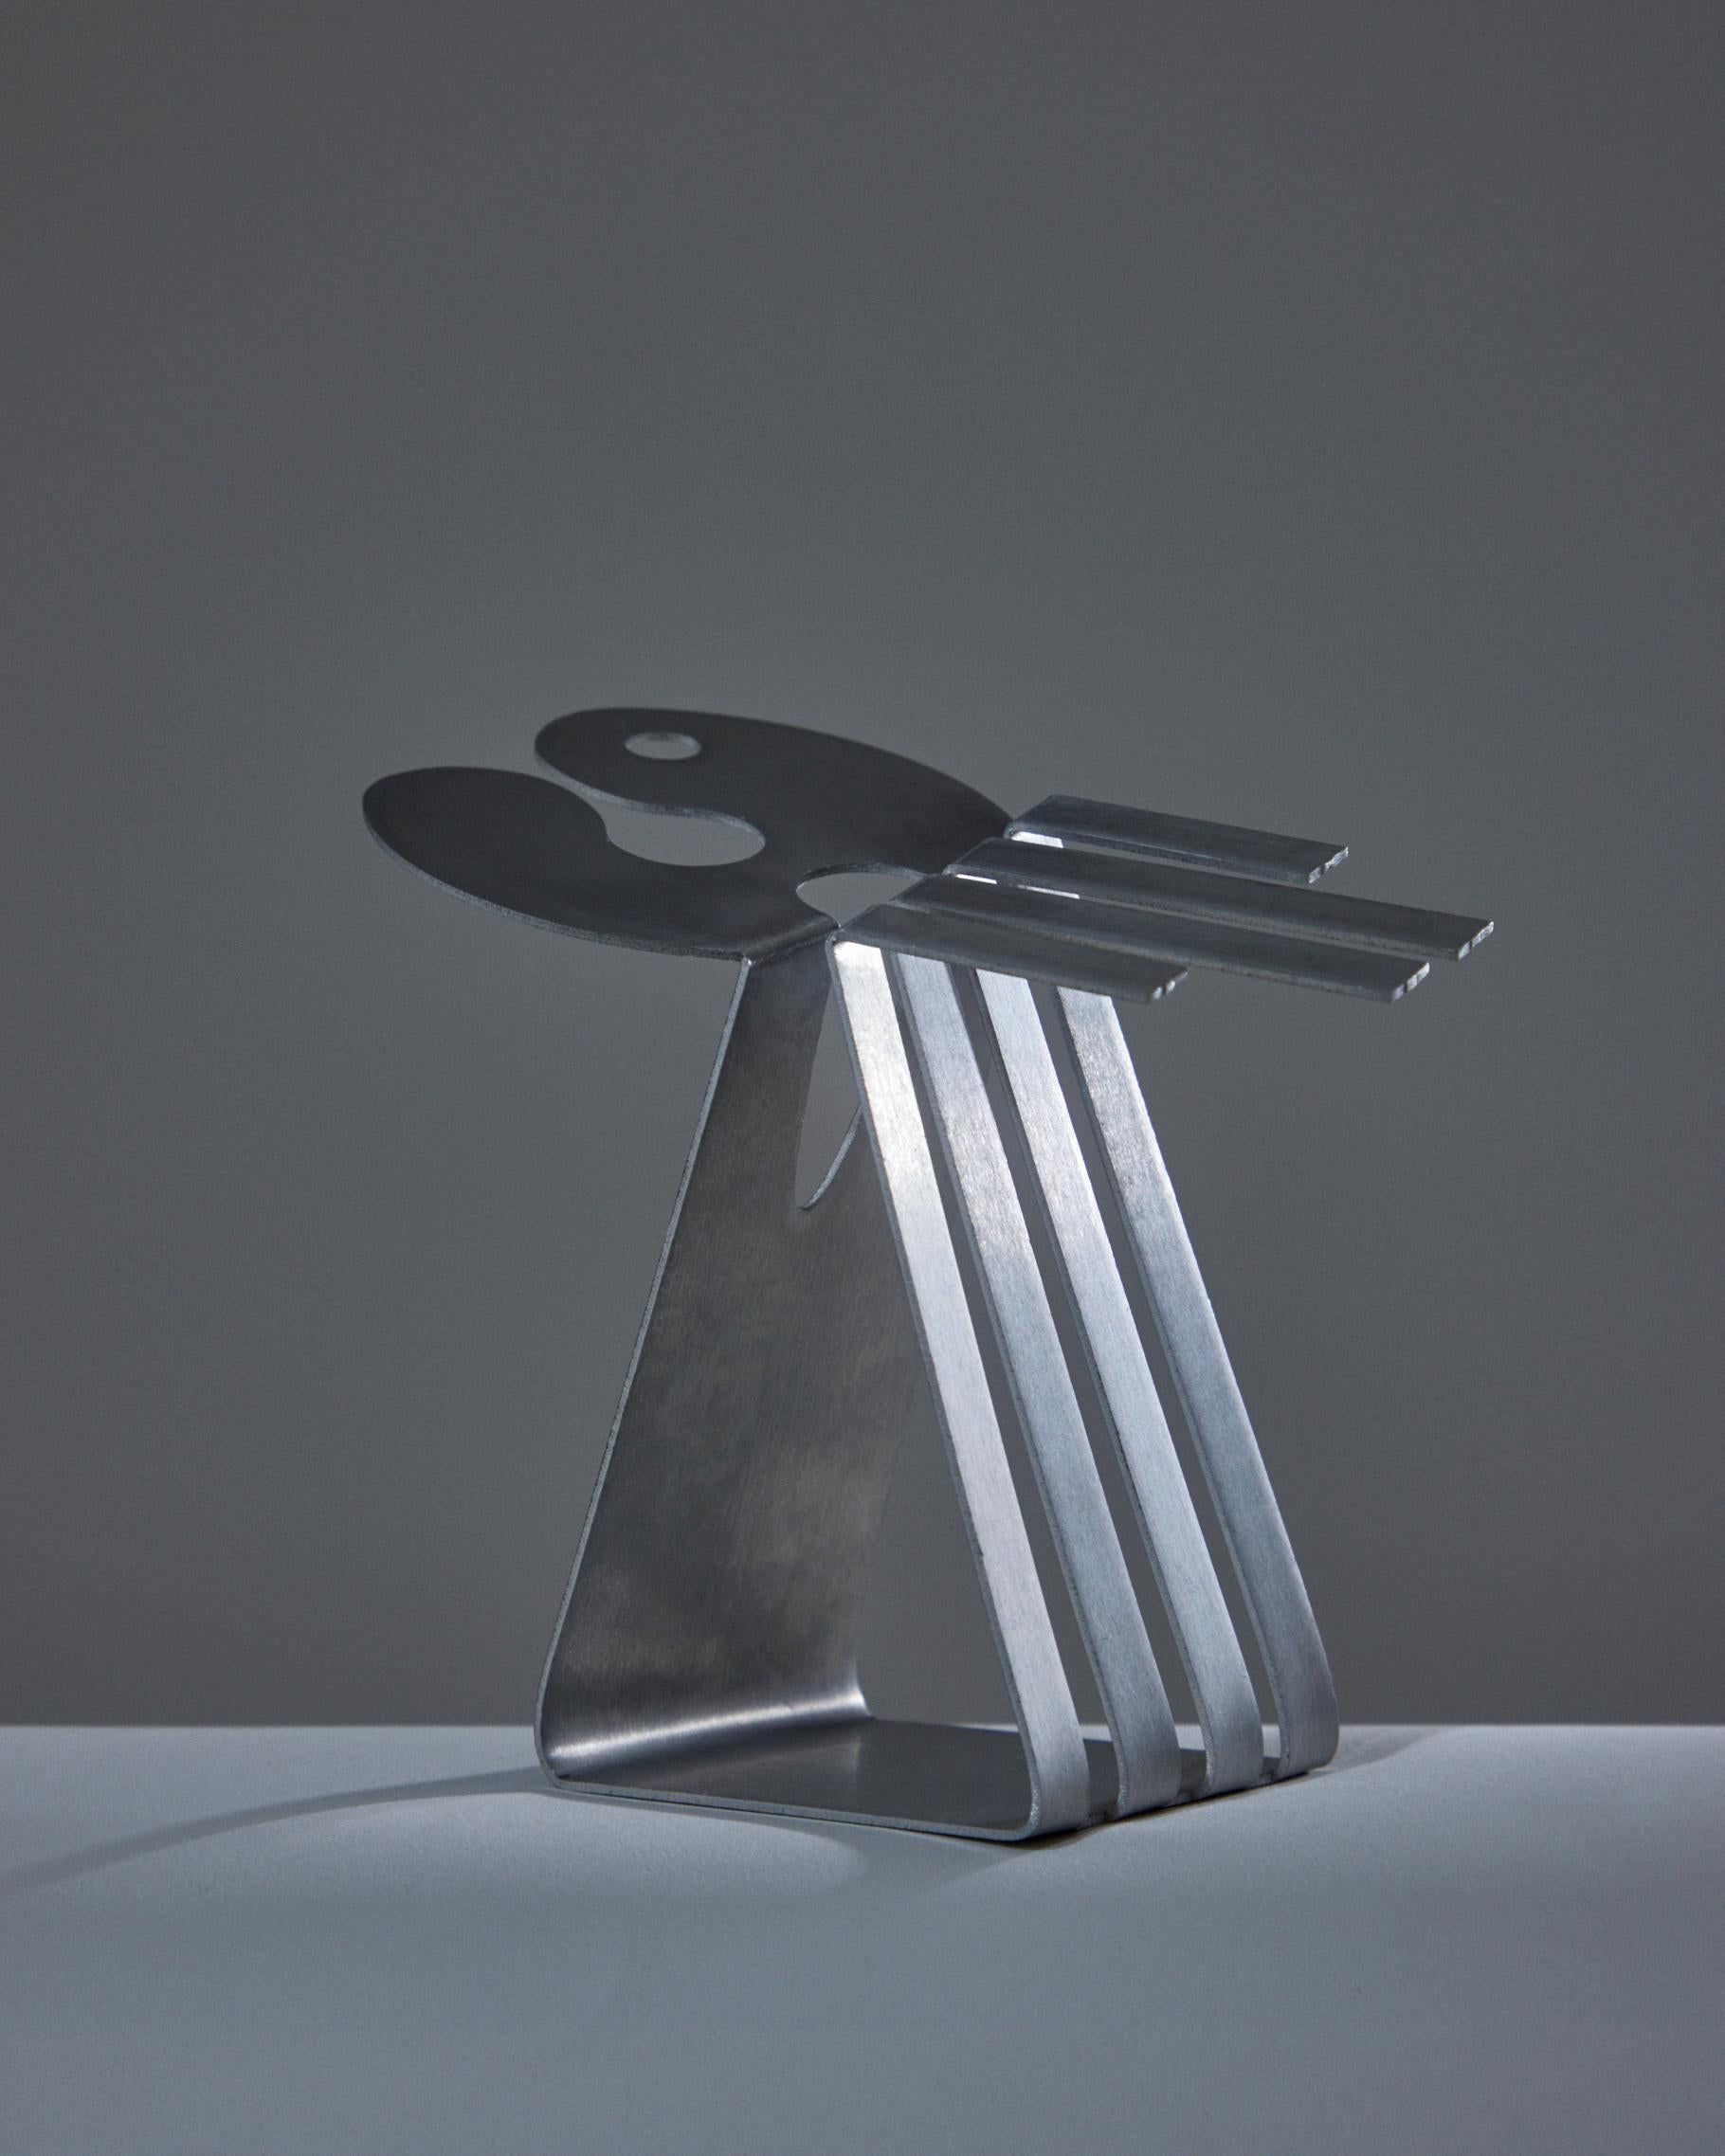 This aluminum candleholder is part of the OO+II Collection that celebrates exuberance by balancing utility with femininity. The products are all handmade in Brooklyn, NY.